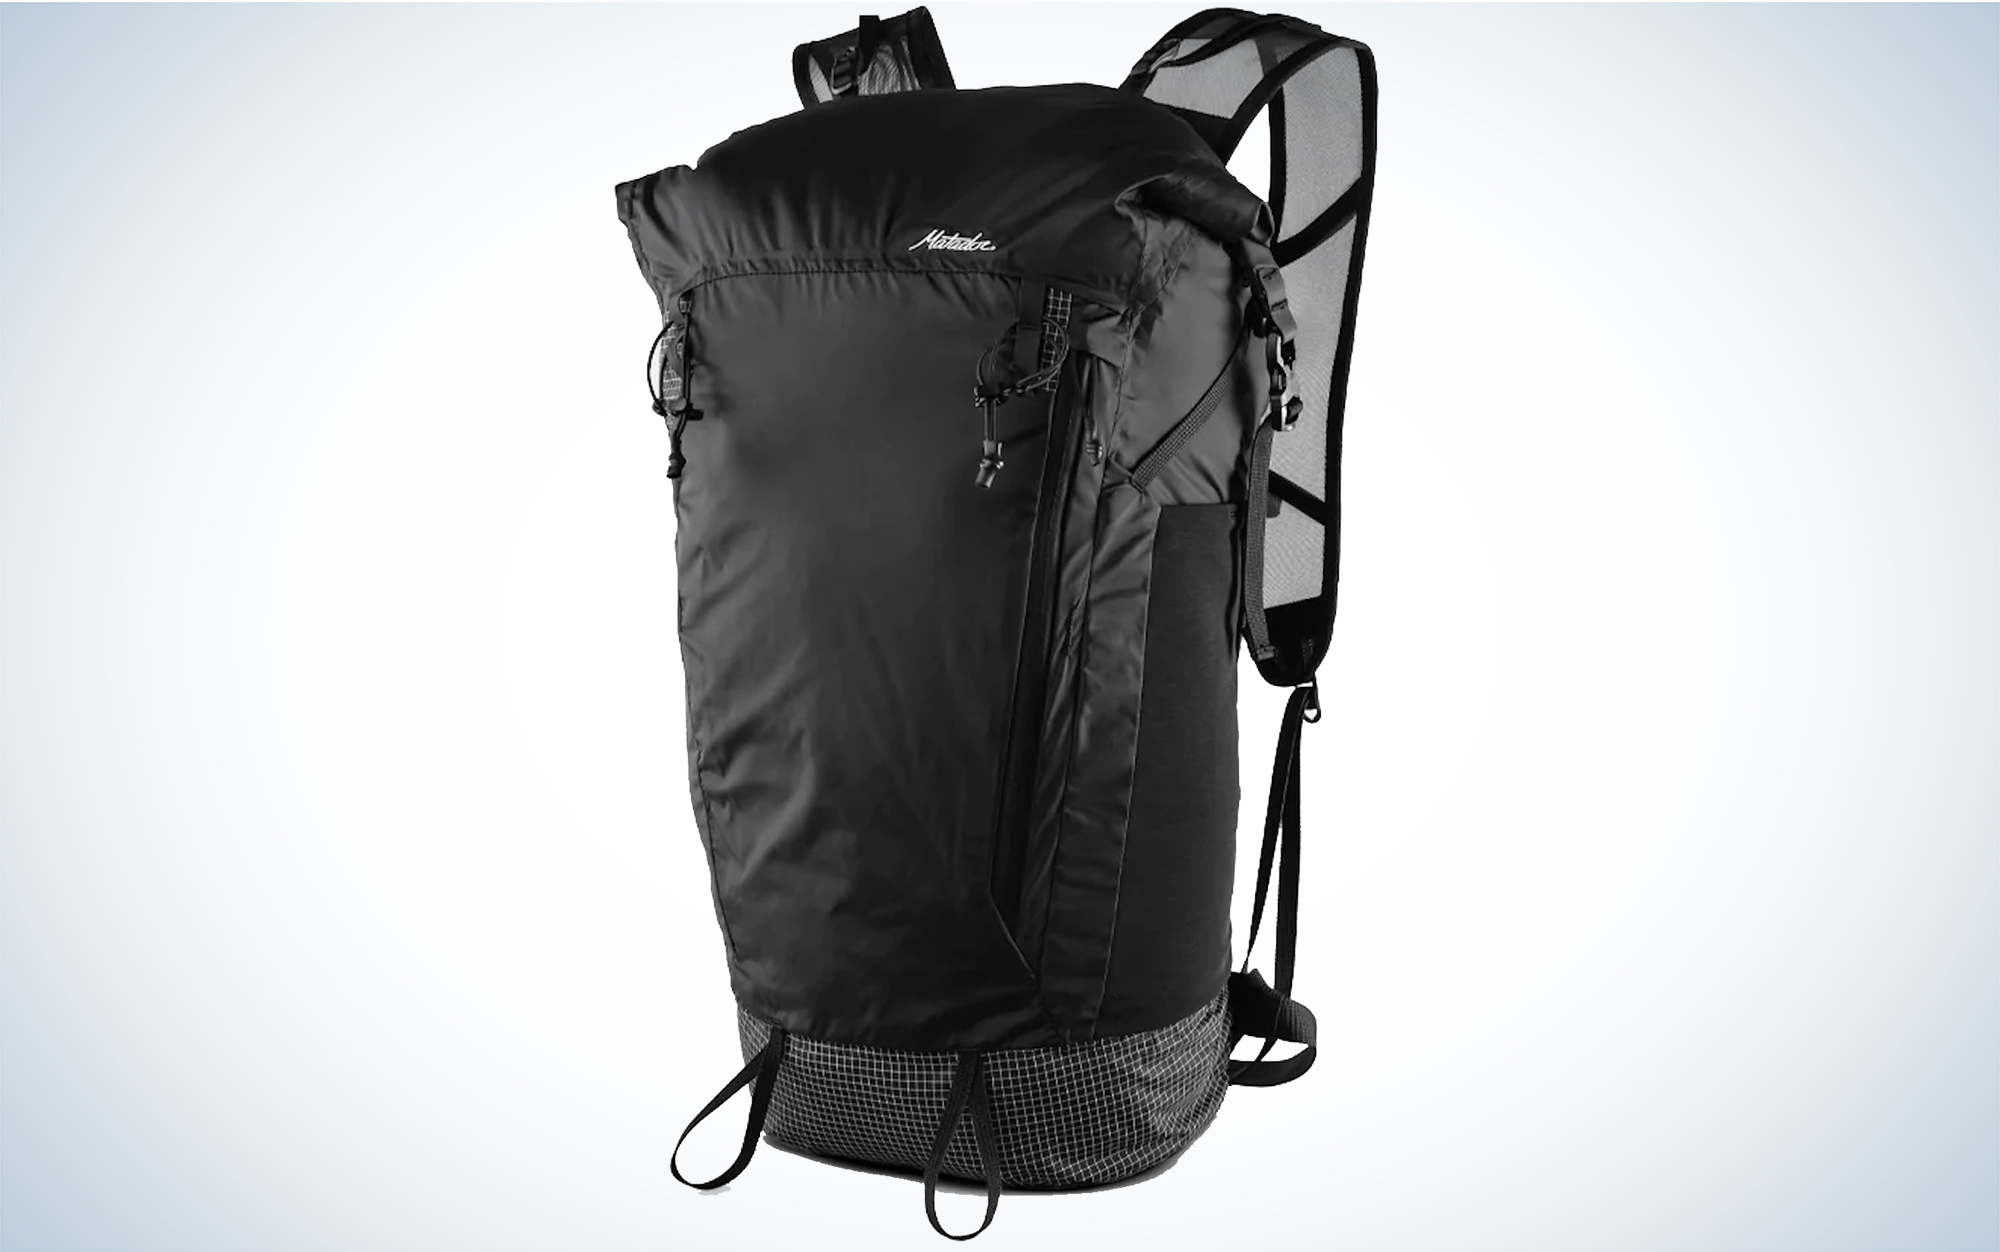 The Matador Freerain is one of the best hiking daypacks.